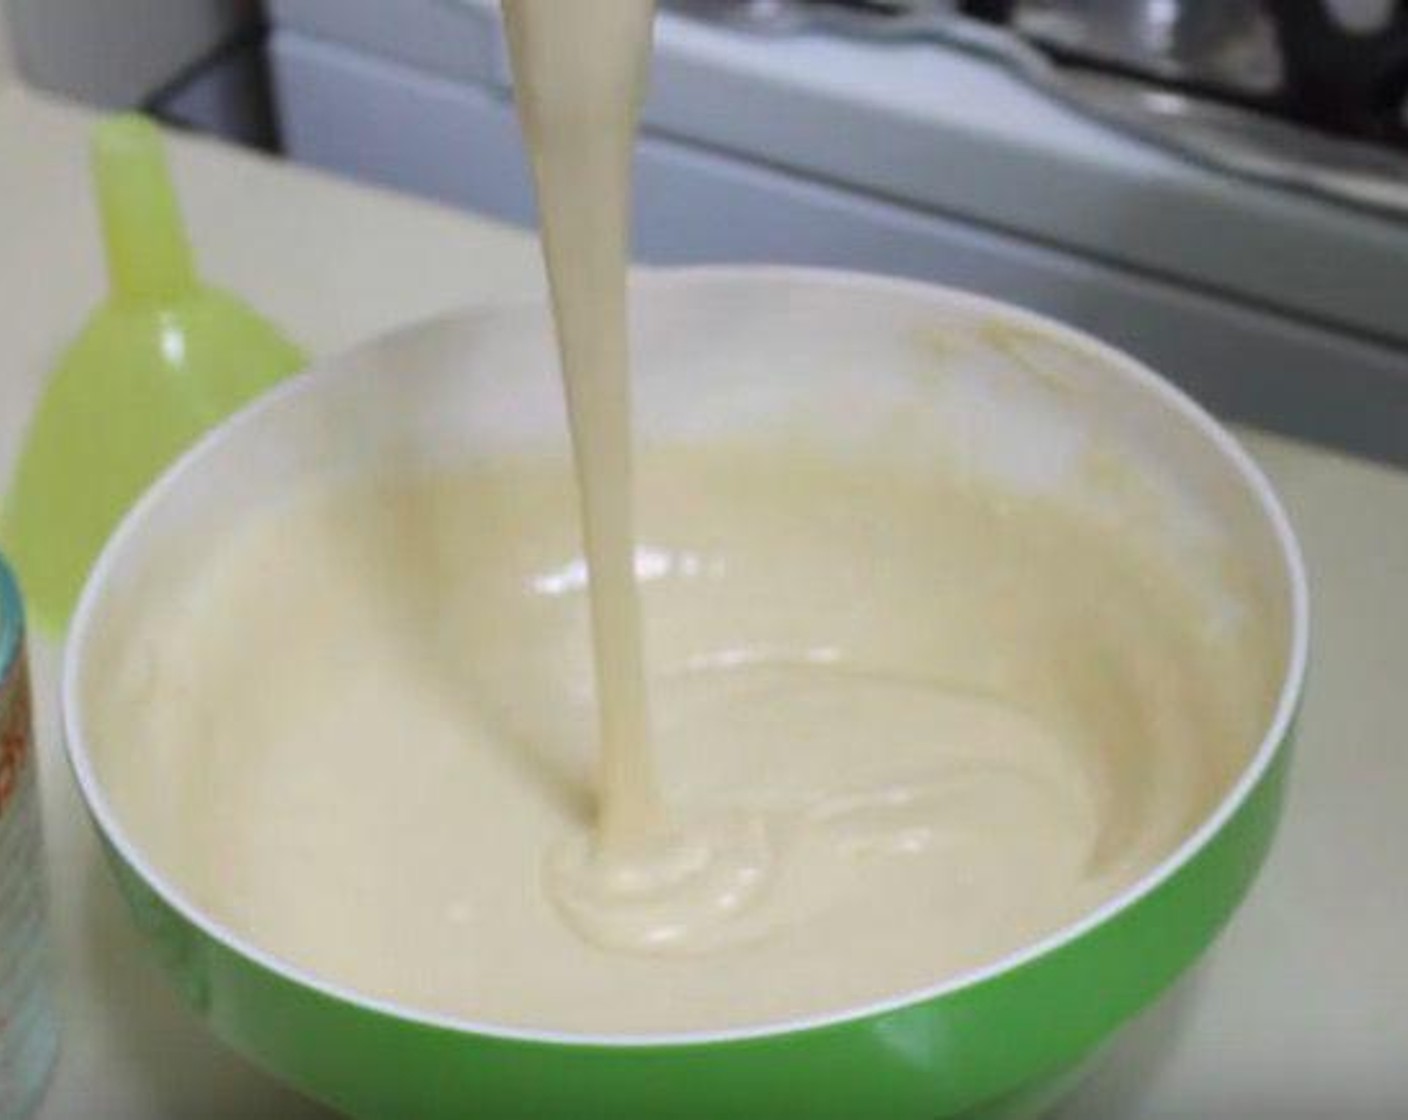 step 3 In a separate jug, combine the Milk (1 2/3 cups), Vanilla Extract (1 tsp), and Eggs (2) and whisk to combine. Pour the milk mixture into the flour mixture, and mix until there are no lumps.